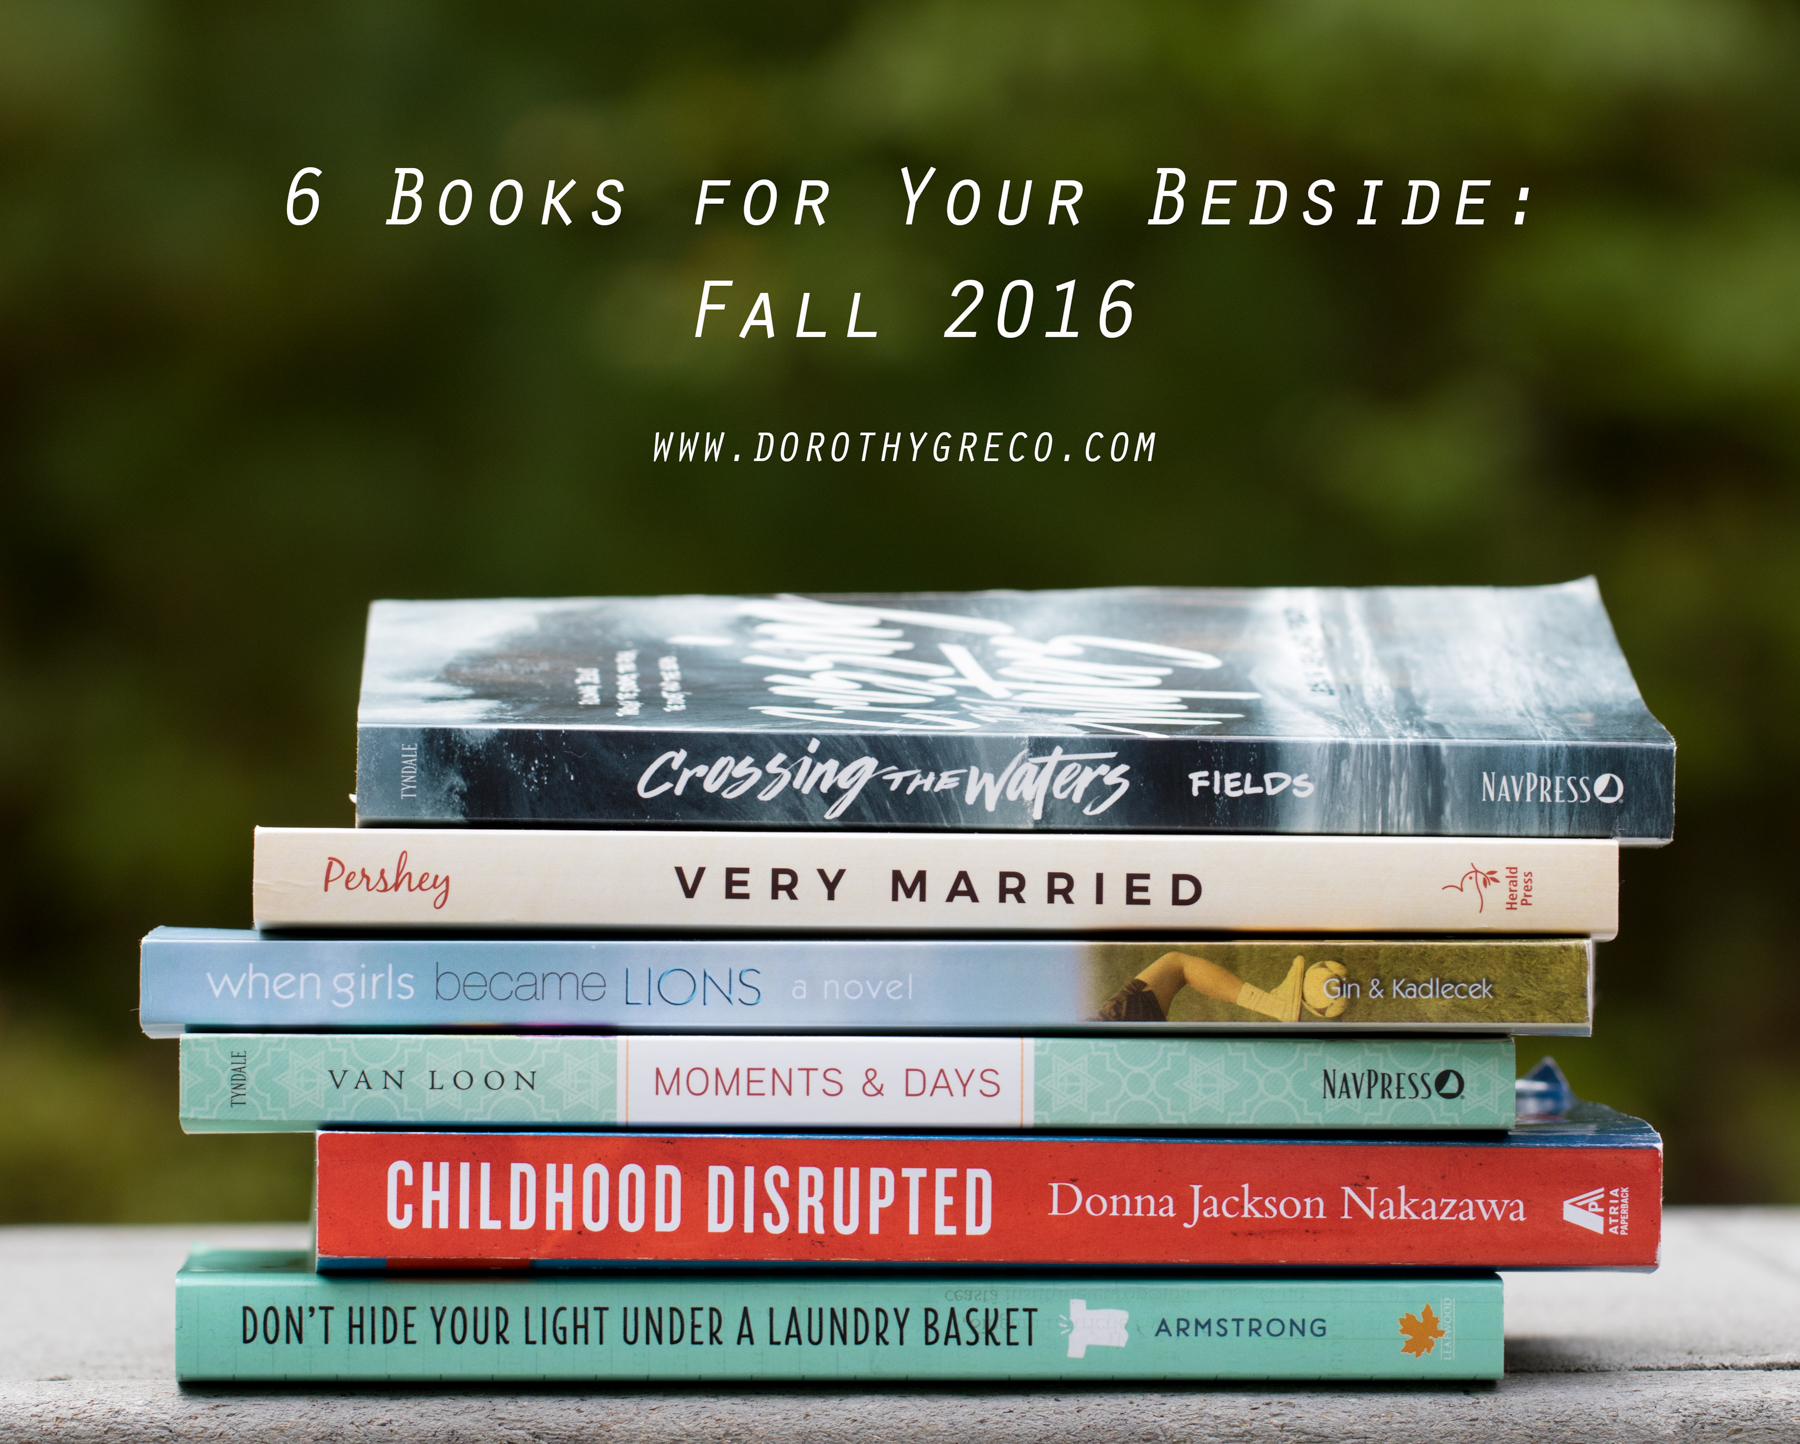 6 Books For Your Bedside: Fall 2016